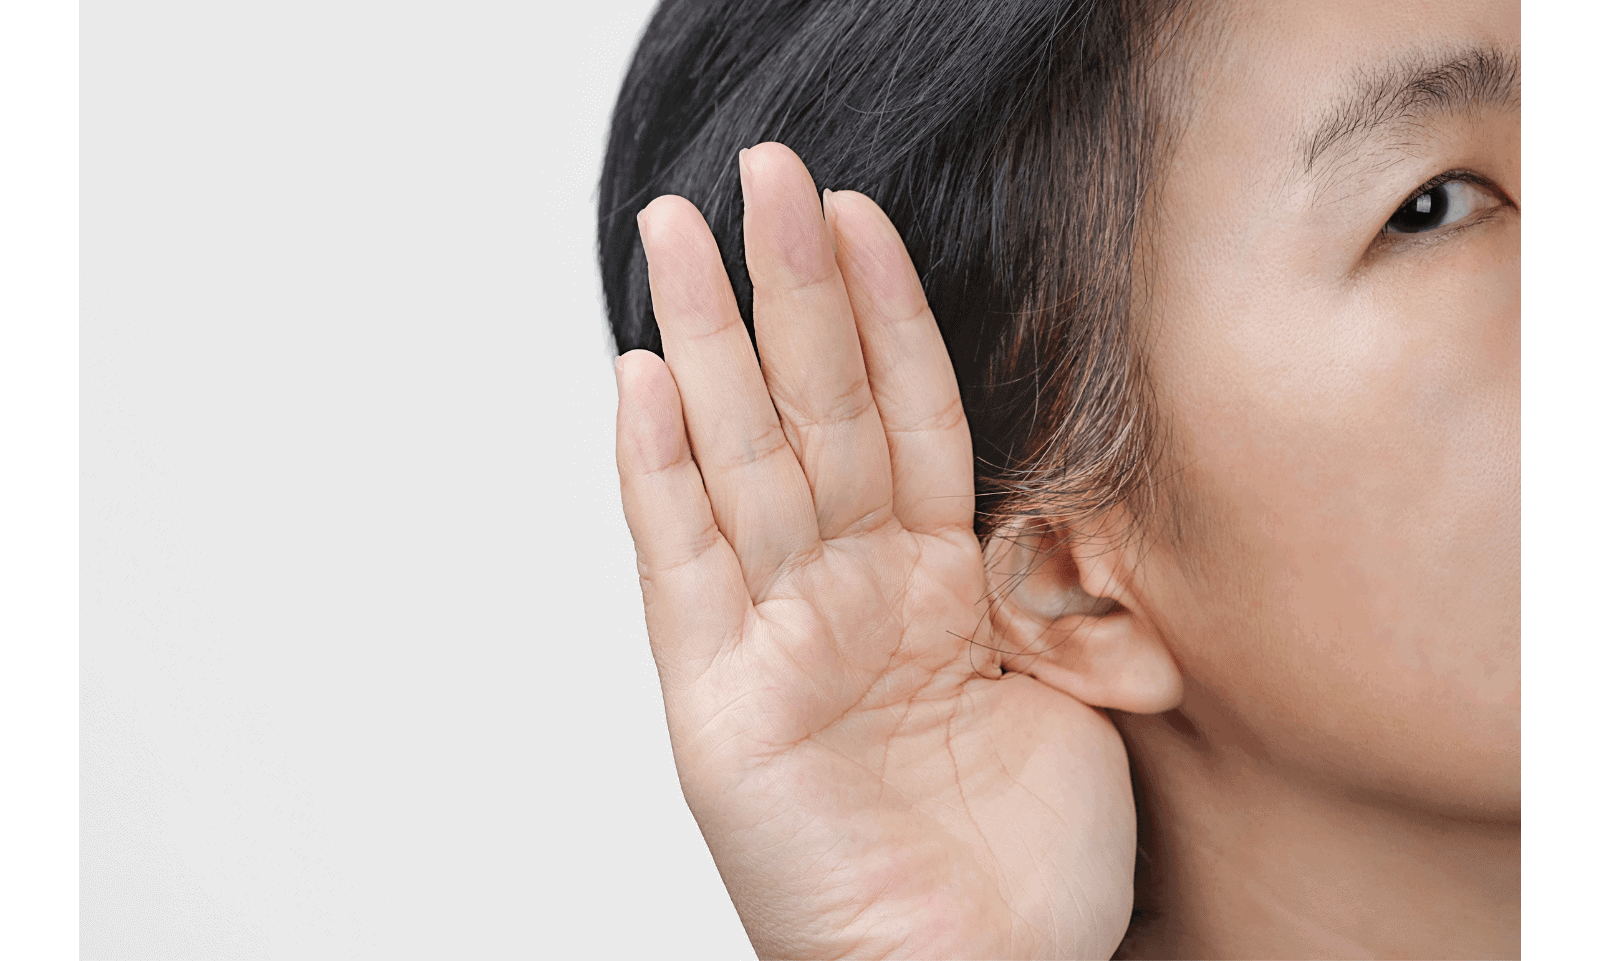 What People with Hearing Loss Wish You Knew